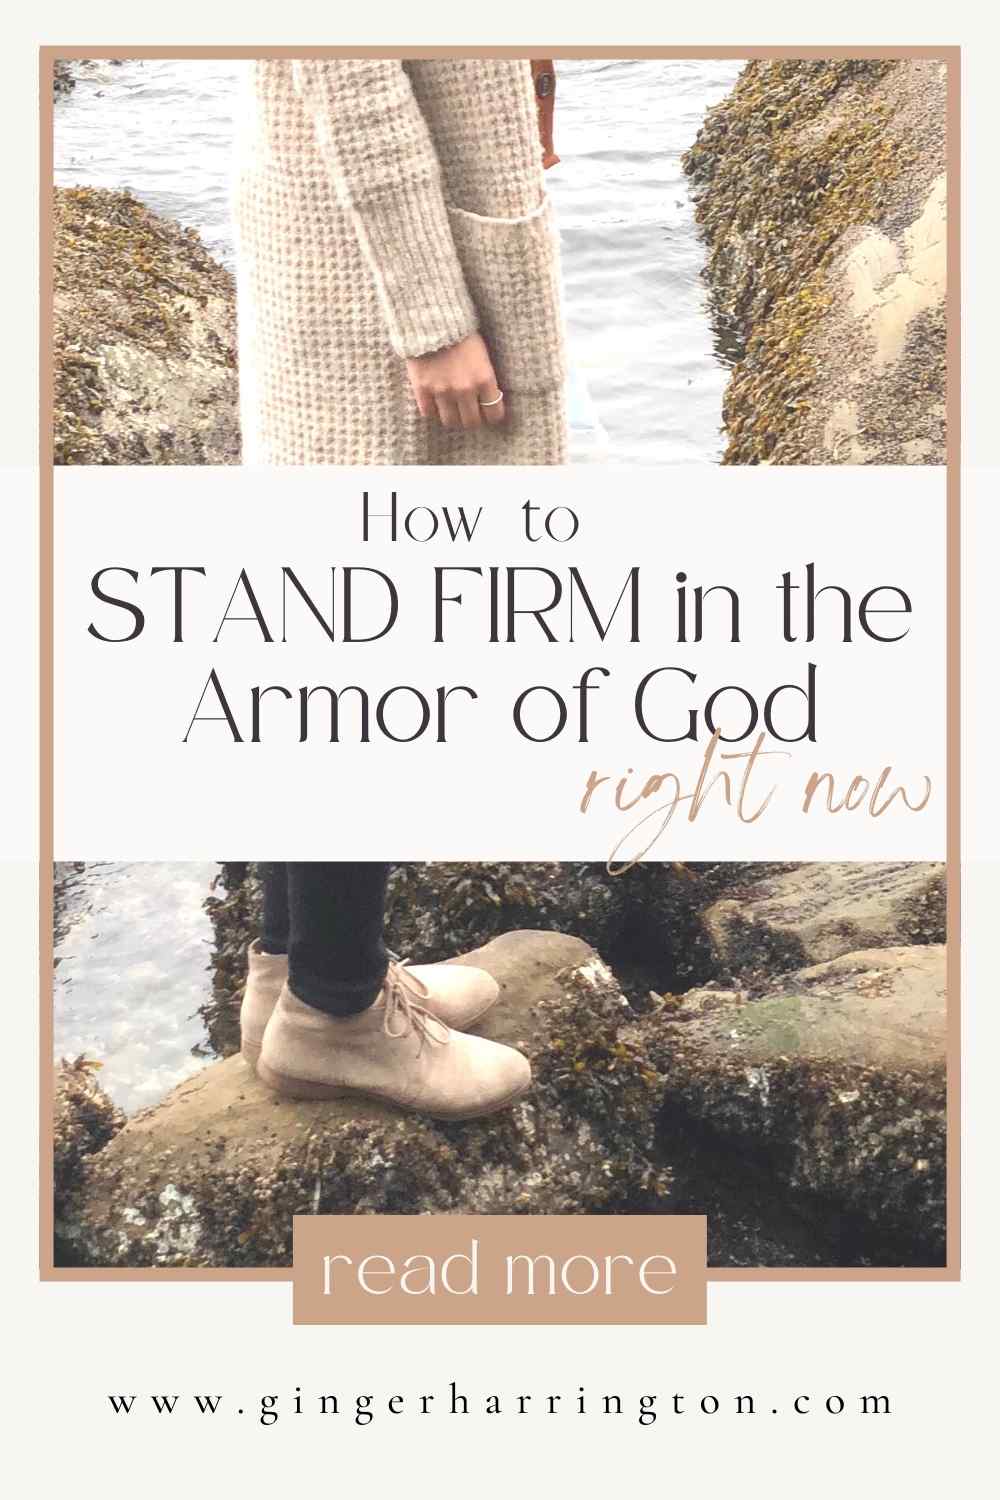 God equips us with spiritual armor to stand firm in the spiritual battles we face. Explore the meaning of the armor of God in this meditation on Ephesians 6:10-18 that shows why we need to put on the armor of God and how to do it. #armorofgod #spiritualstrengthforchristianwomen